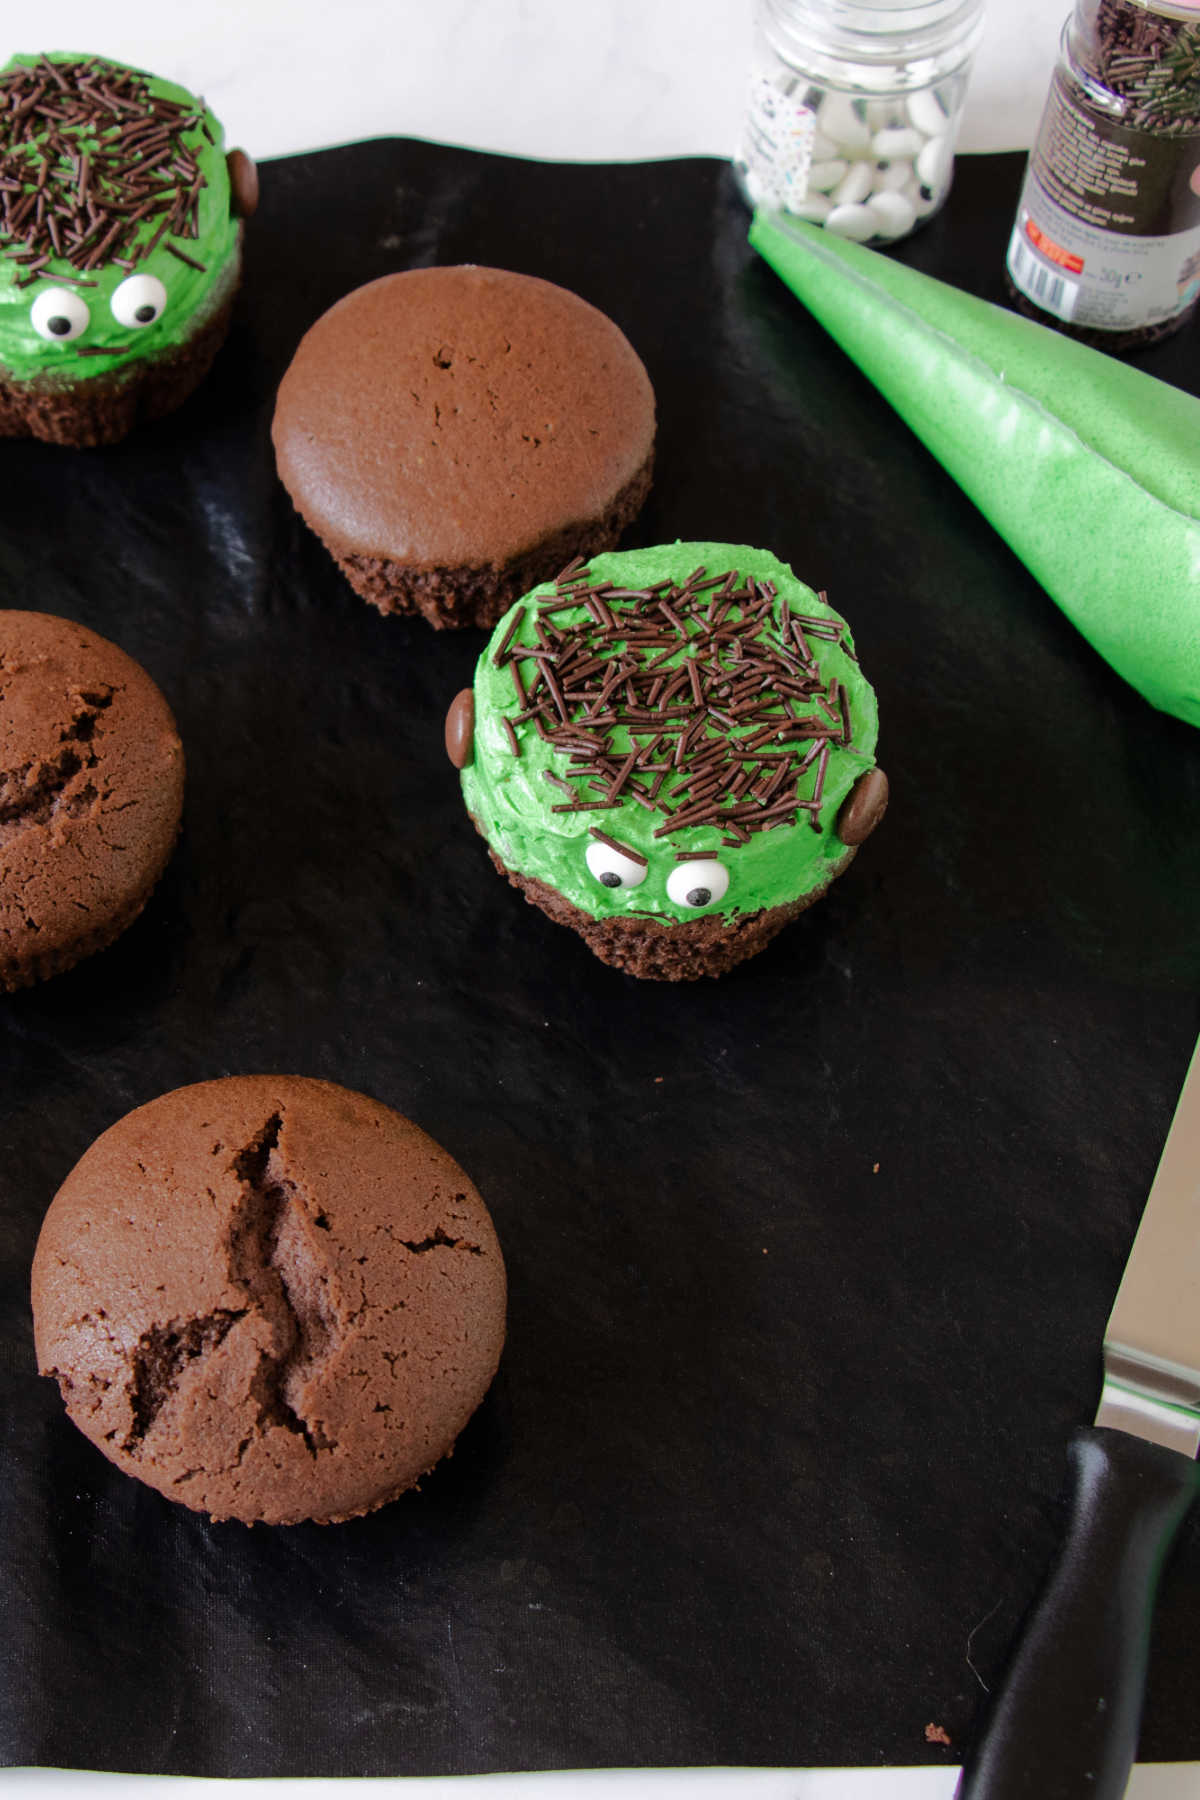 Freshly baked chocolate cupcakes with piping bag filled with green buttercream, small thing candy eyes and chocolate sprinkles.